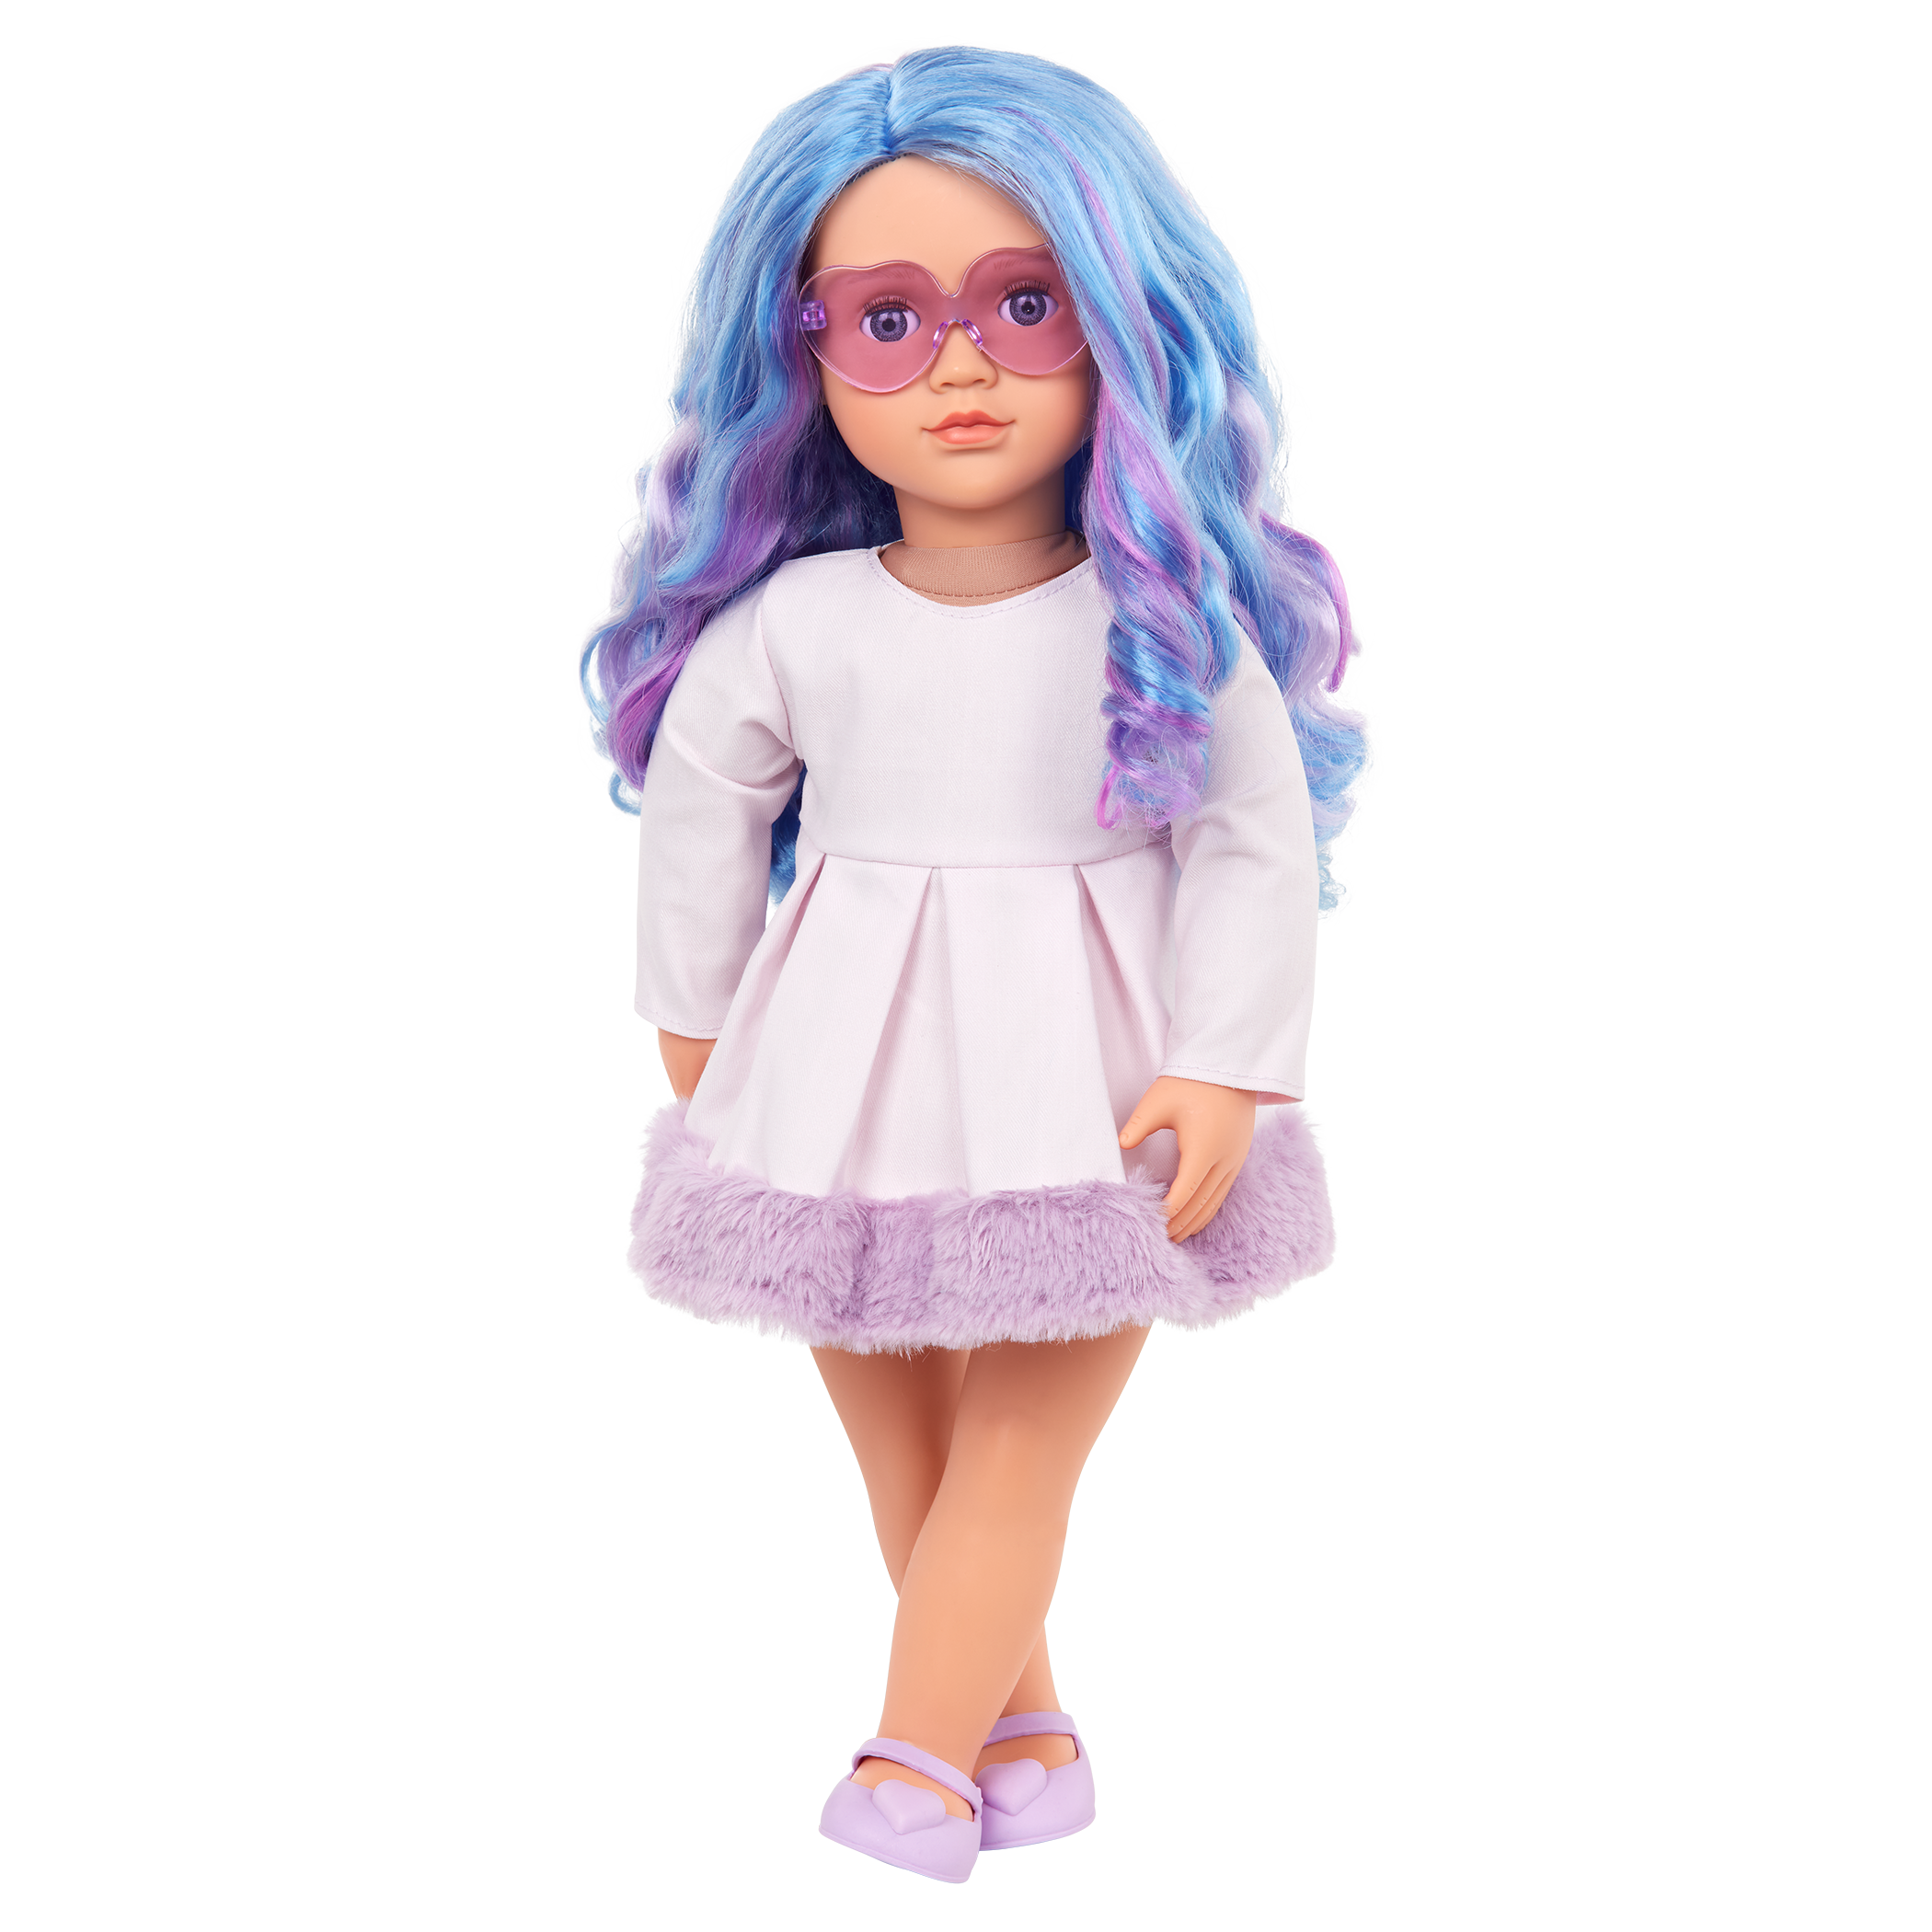 Our Generation 18-inch Multicolored Hair Doll Veronika